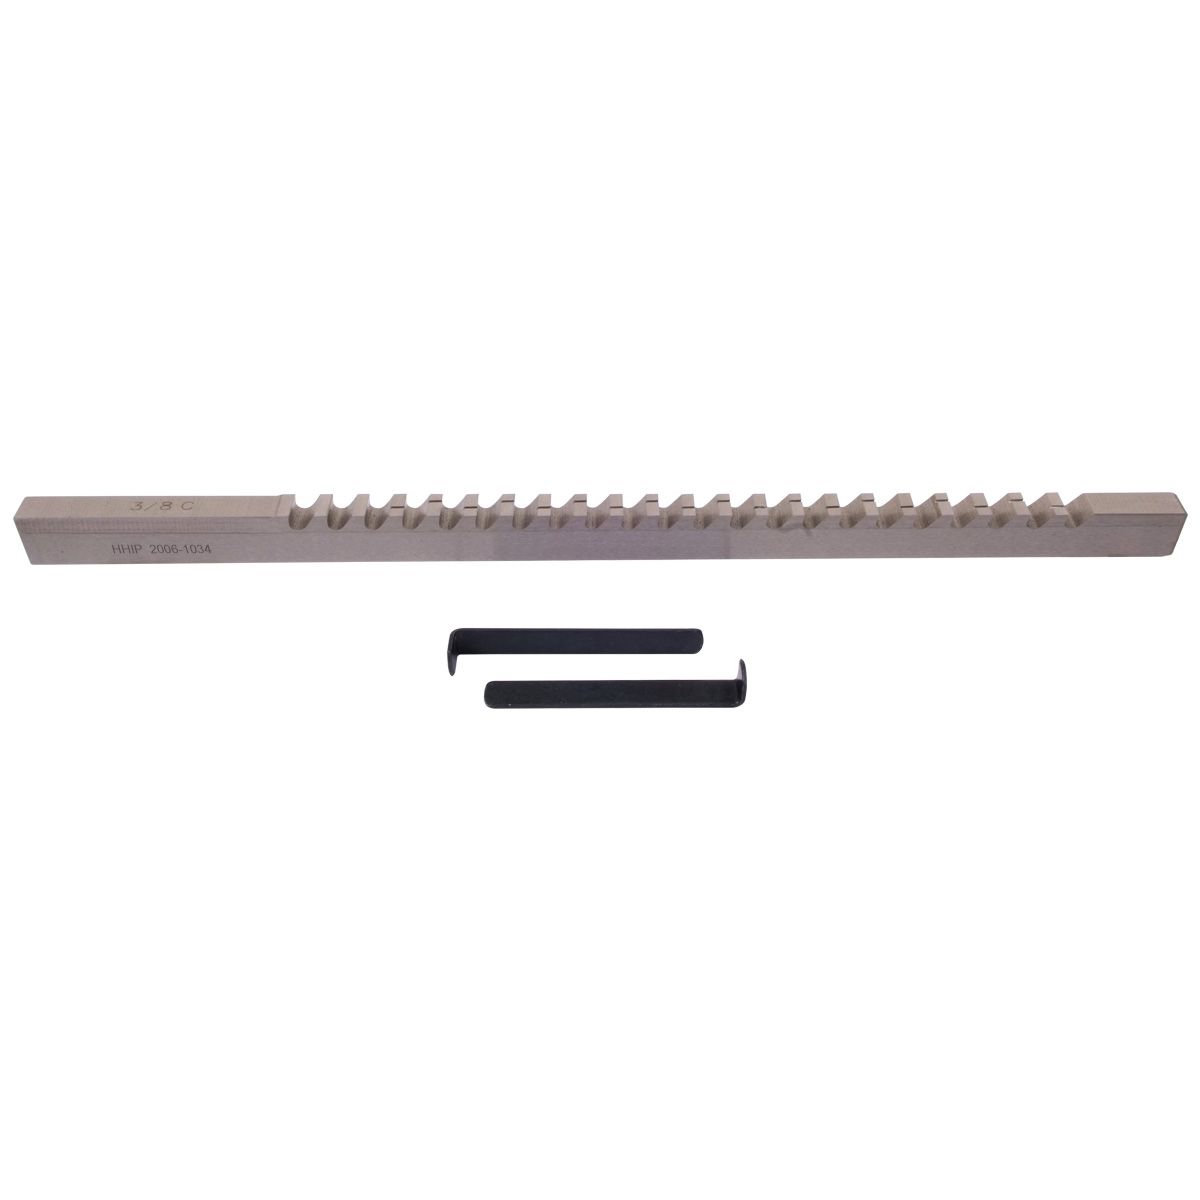 3/8" C HSS KEYWAY BROACH WITH 2 SHIMS (2006-1034)